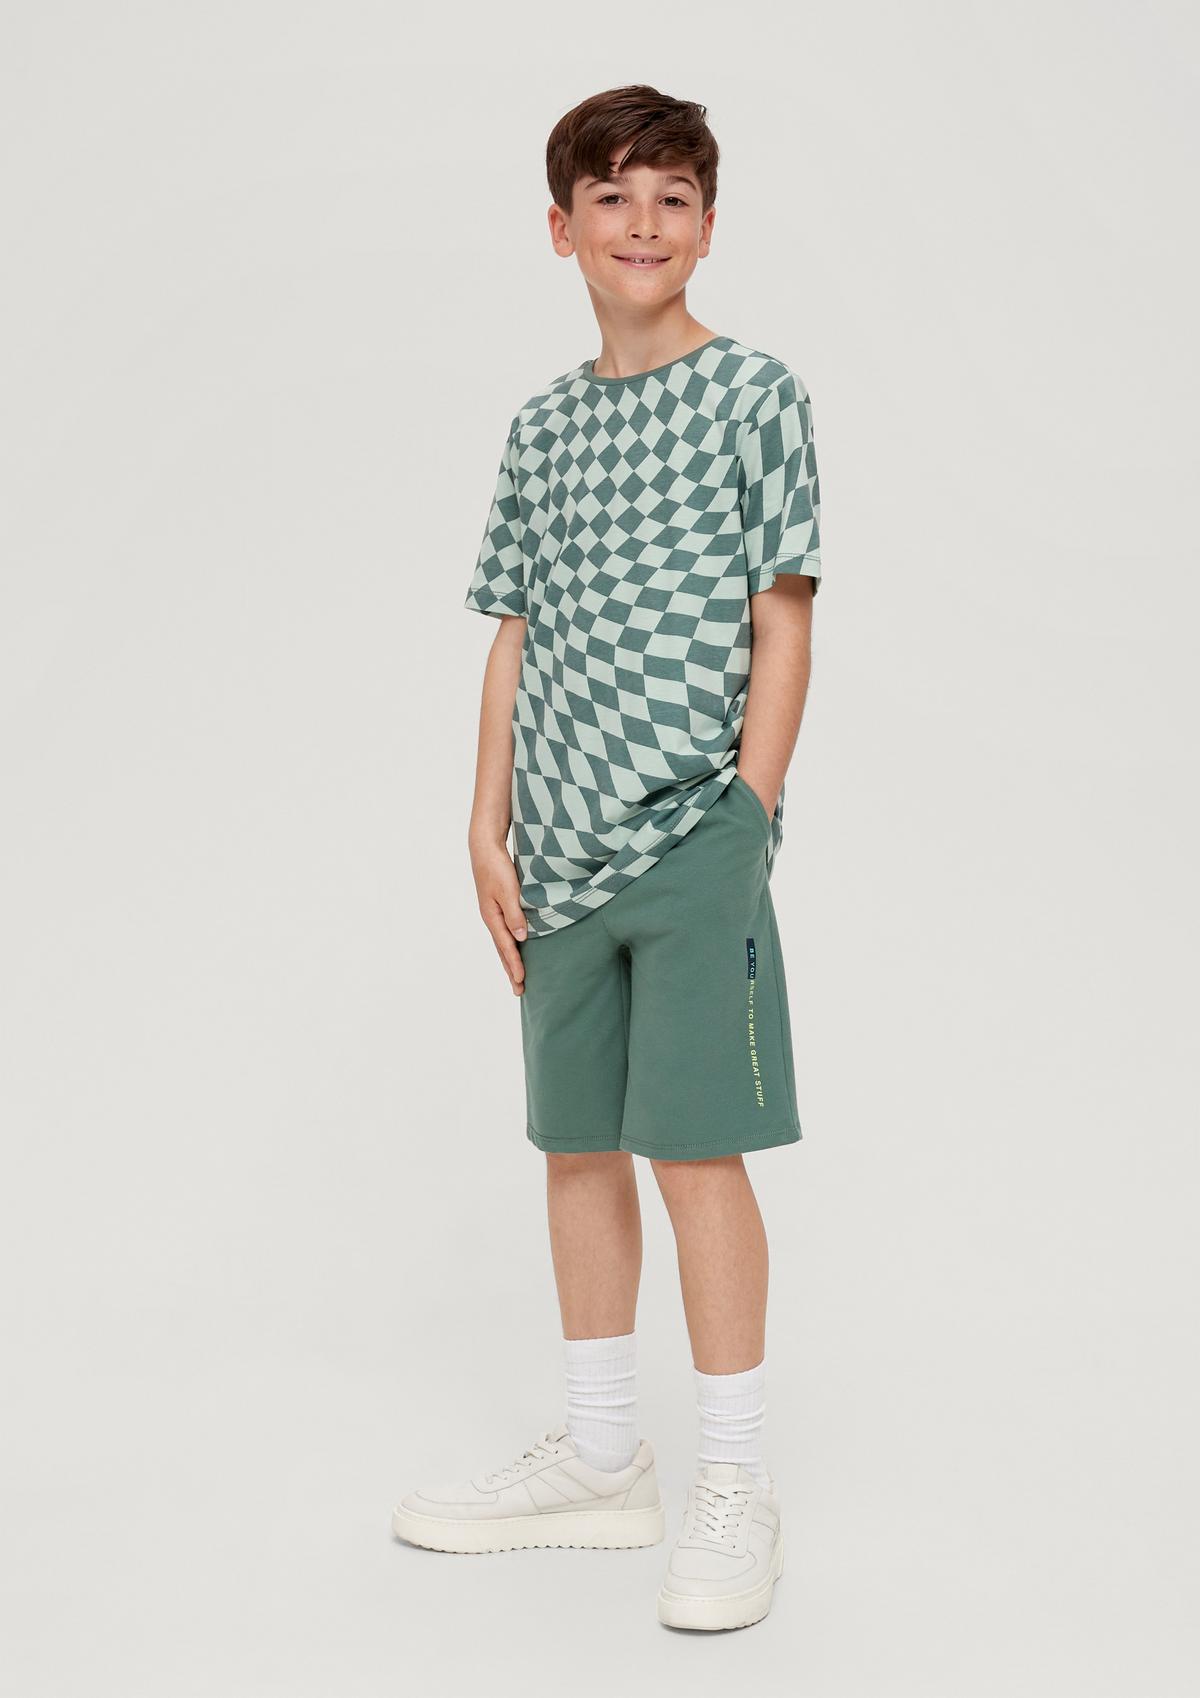 teens Bermuda for online Find boys and shorts